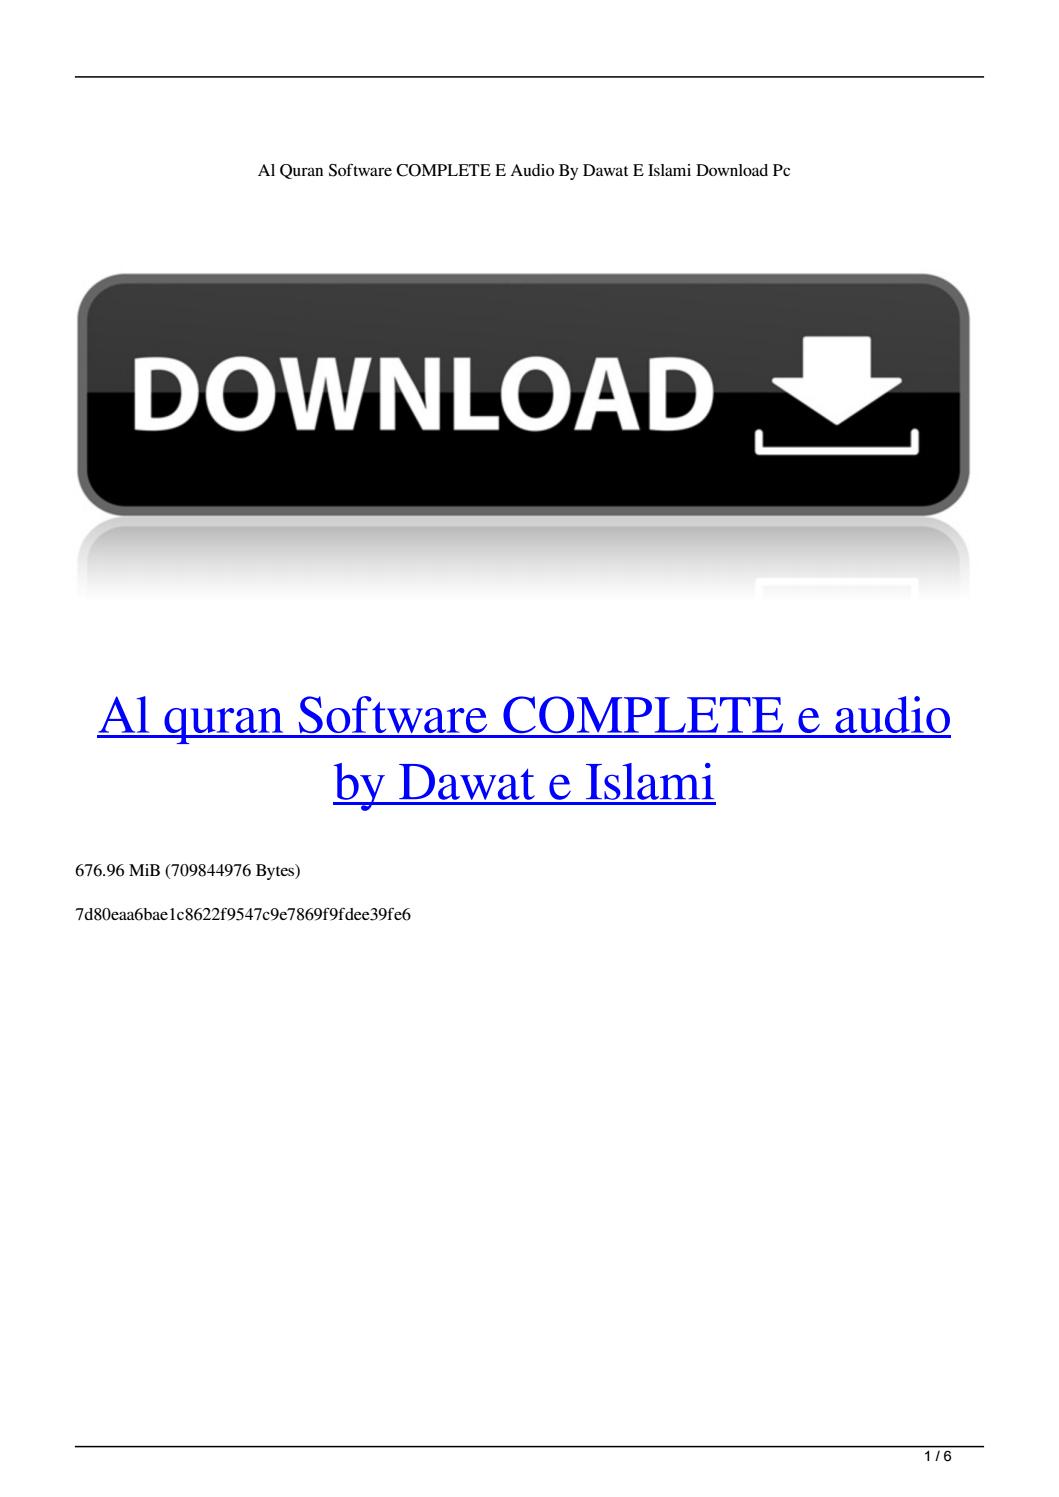 Free download for mobile phone